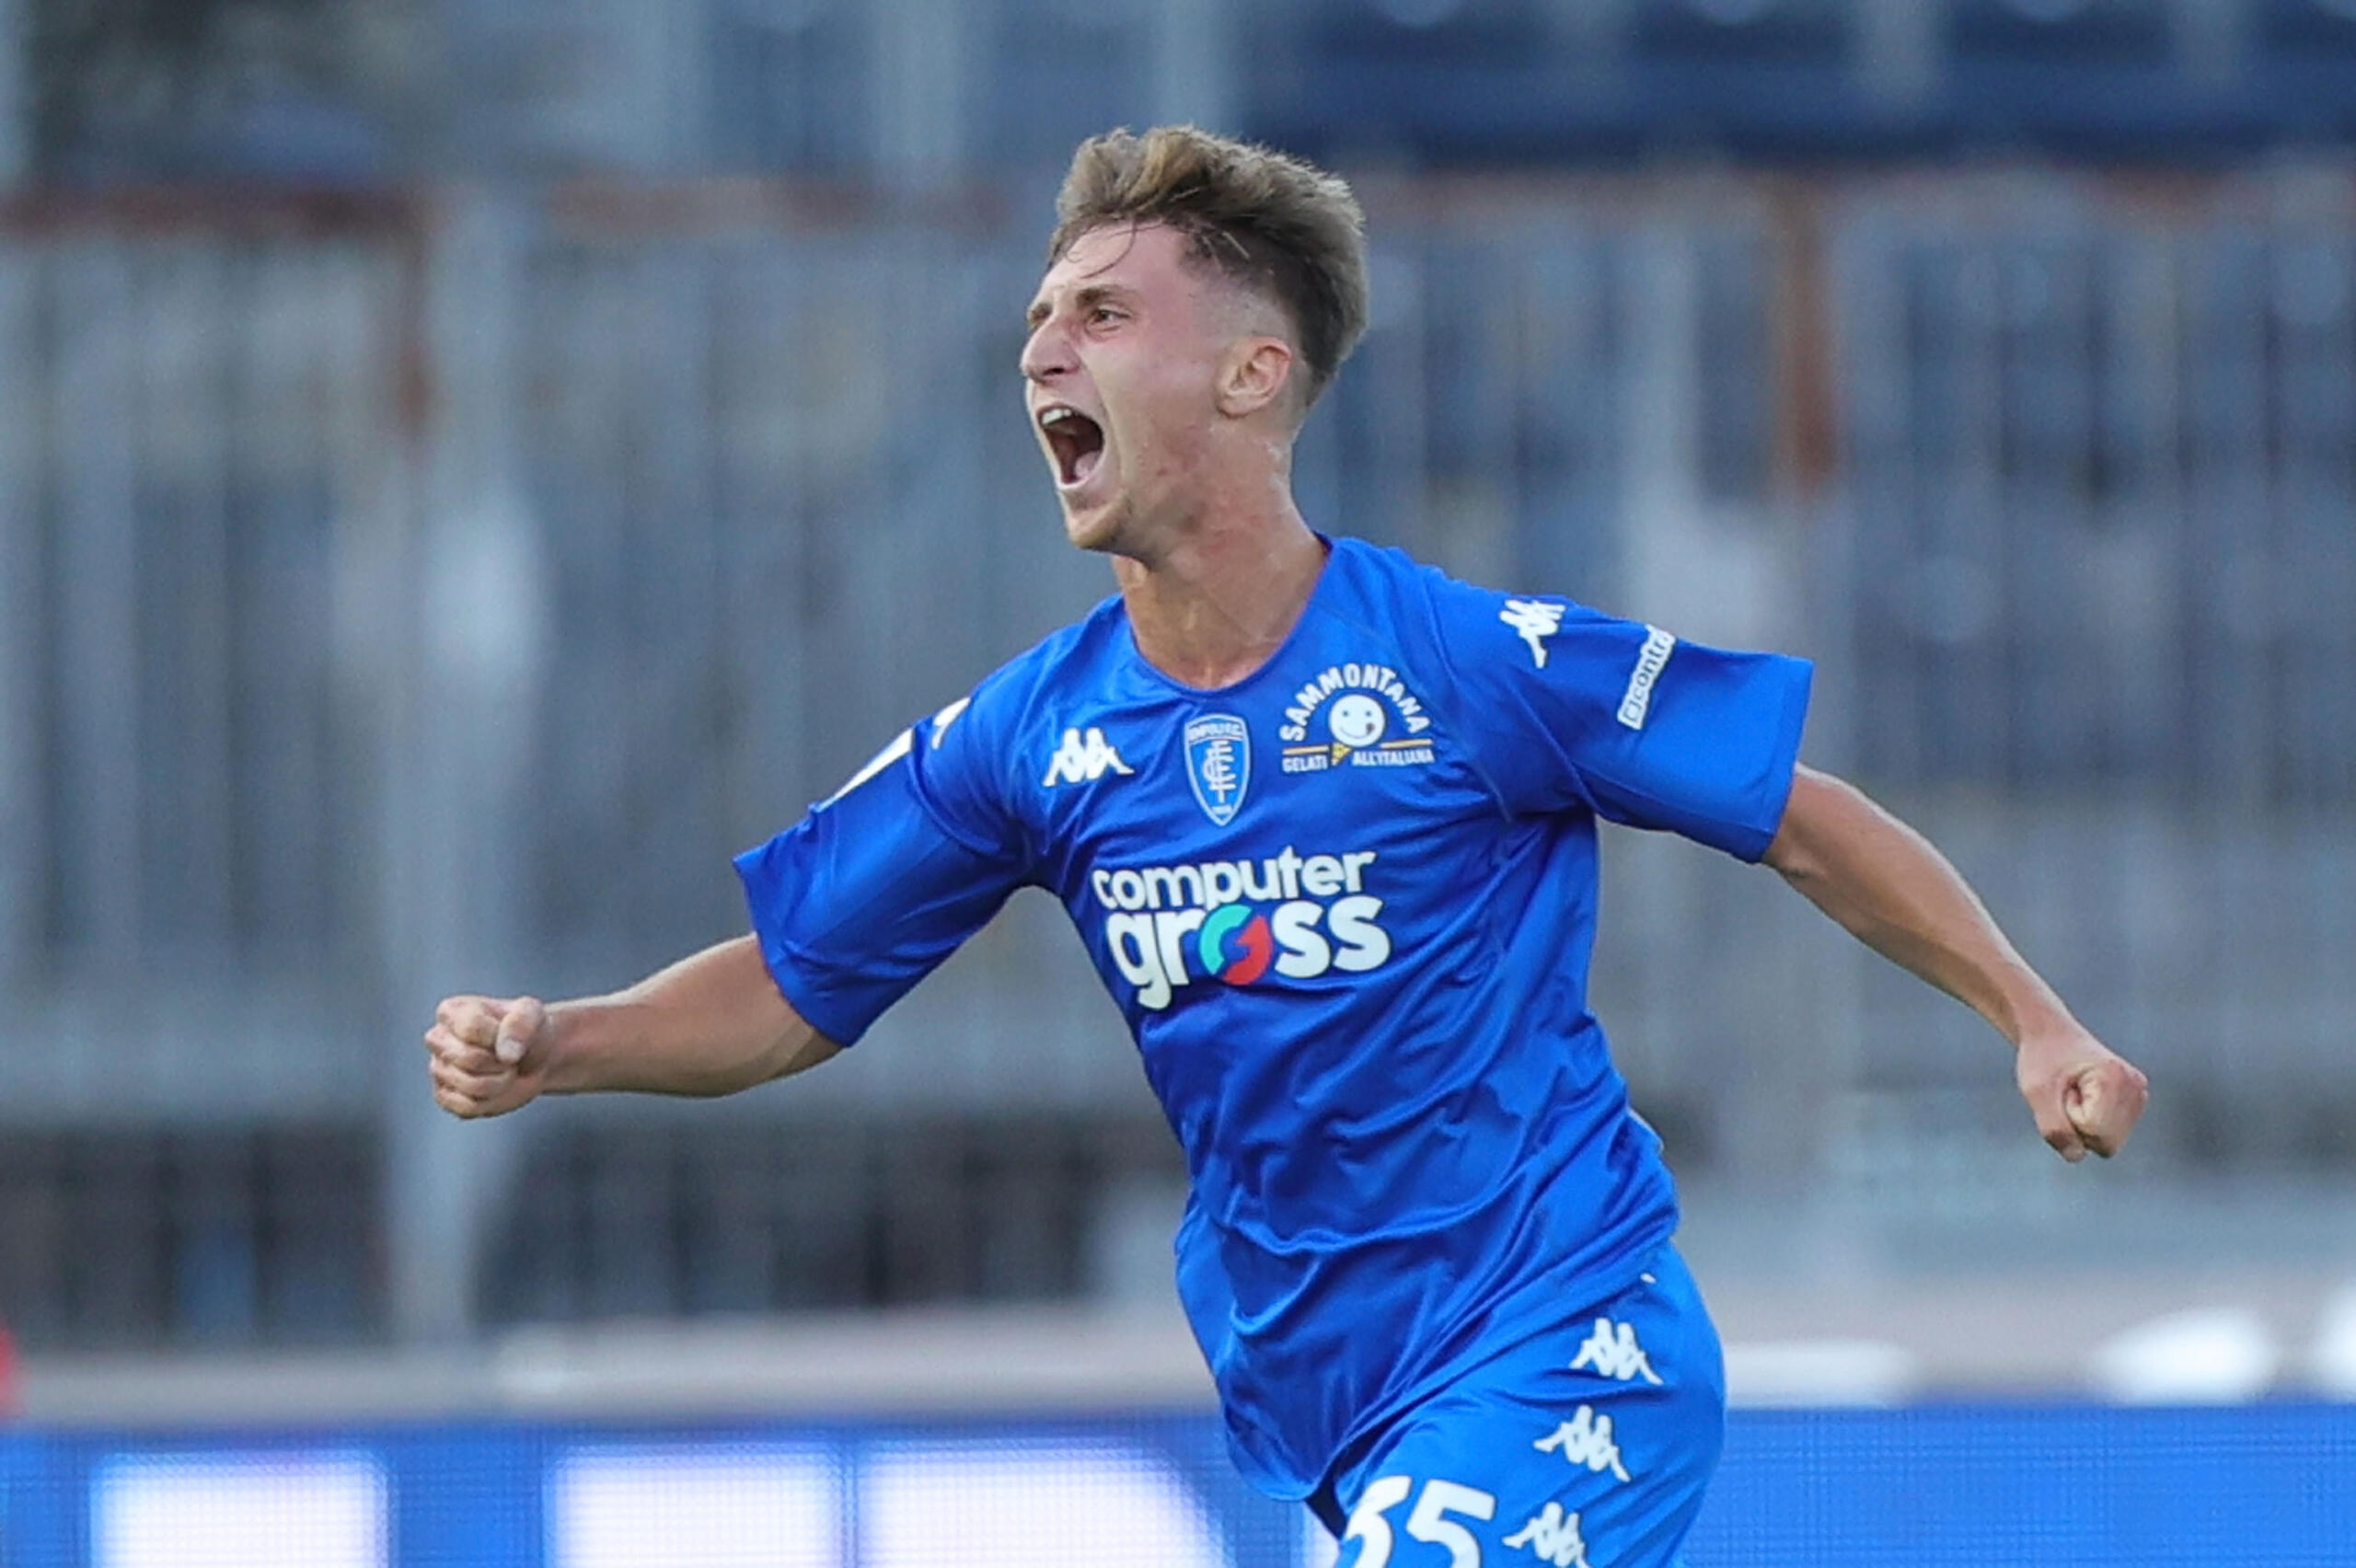 Empoli would like to keep Tommaso Baldanzi until the end of the season, but he’s not completely untouchable, as normal for a minnow.